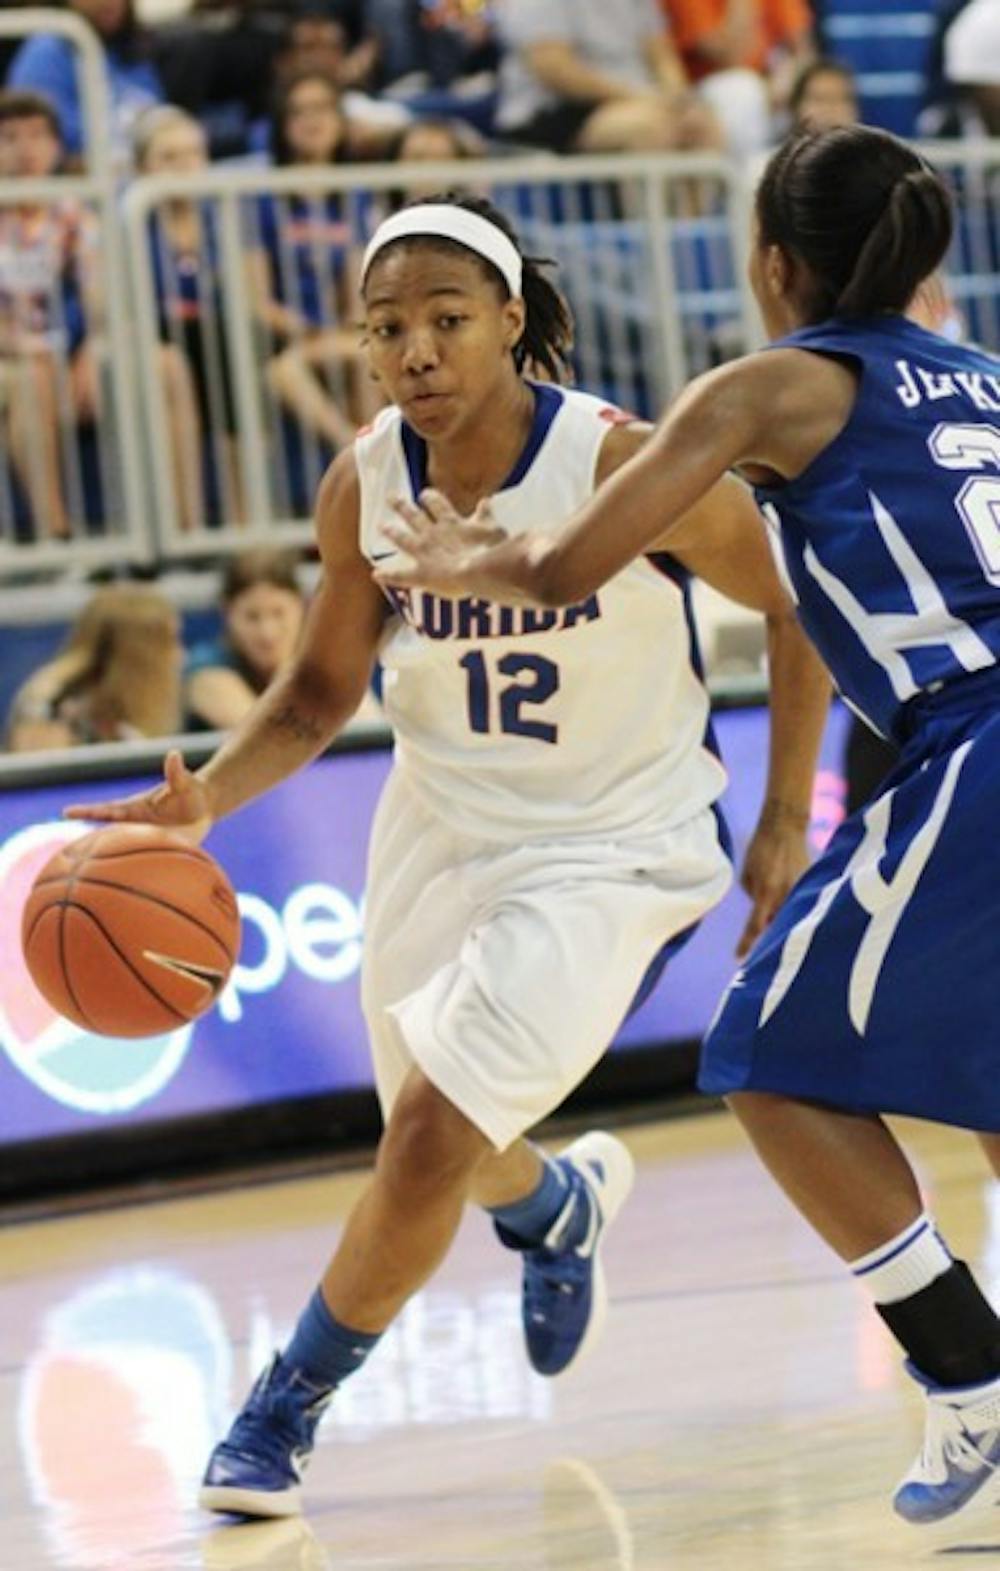 <p>Senior guard Deana Allen is averaging 8.1 points, 2.1 assists, 5.9 rebounds and 2.6 steals per game off the bench for Florida.</p>